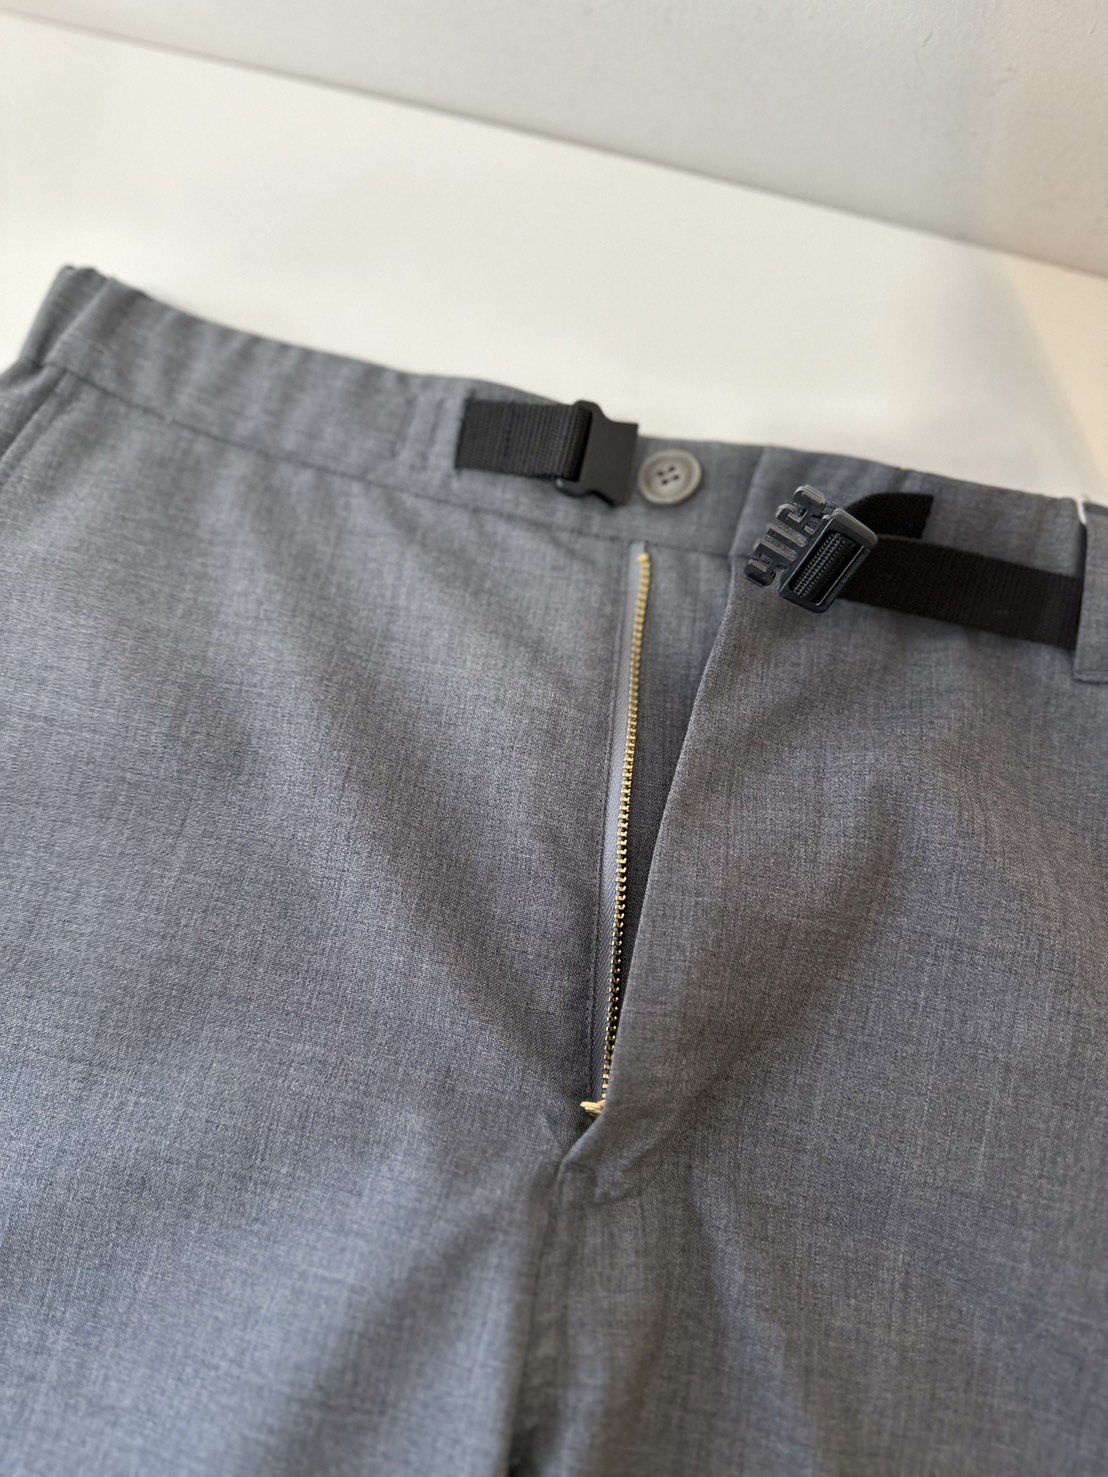 ALLEGE<br />Wool Easy Pants / Gray<img class='new_mark_img2' src='https://img.shop-pro.jp/img/new/icons14.gif' style='border:none;display:inline;margin:0px;padding:0px;width:auto;' />